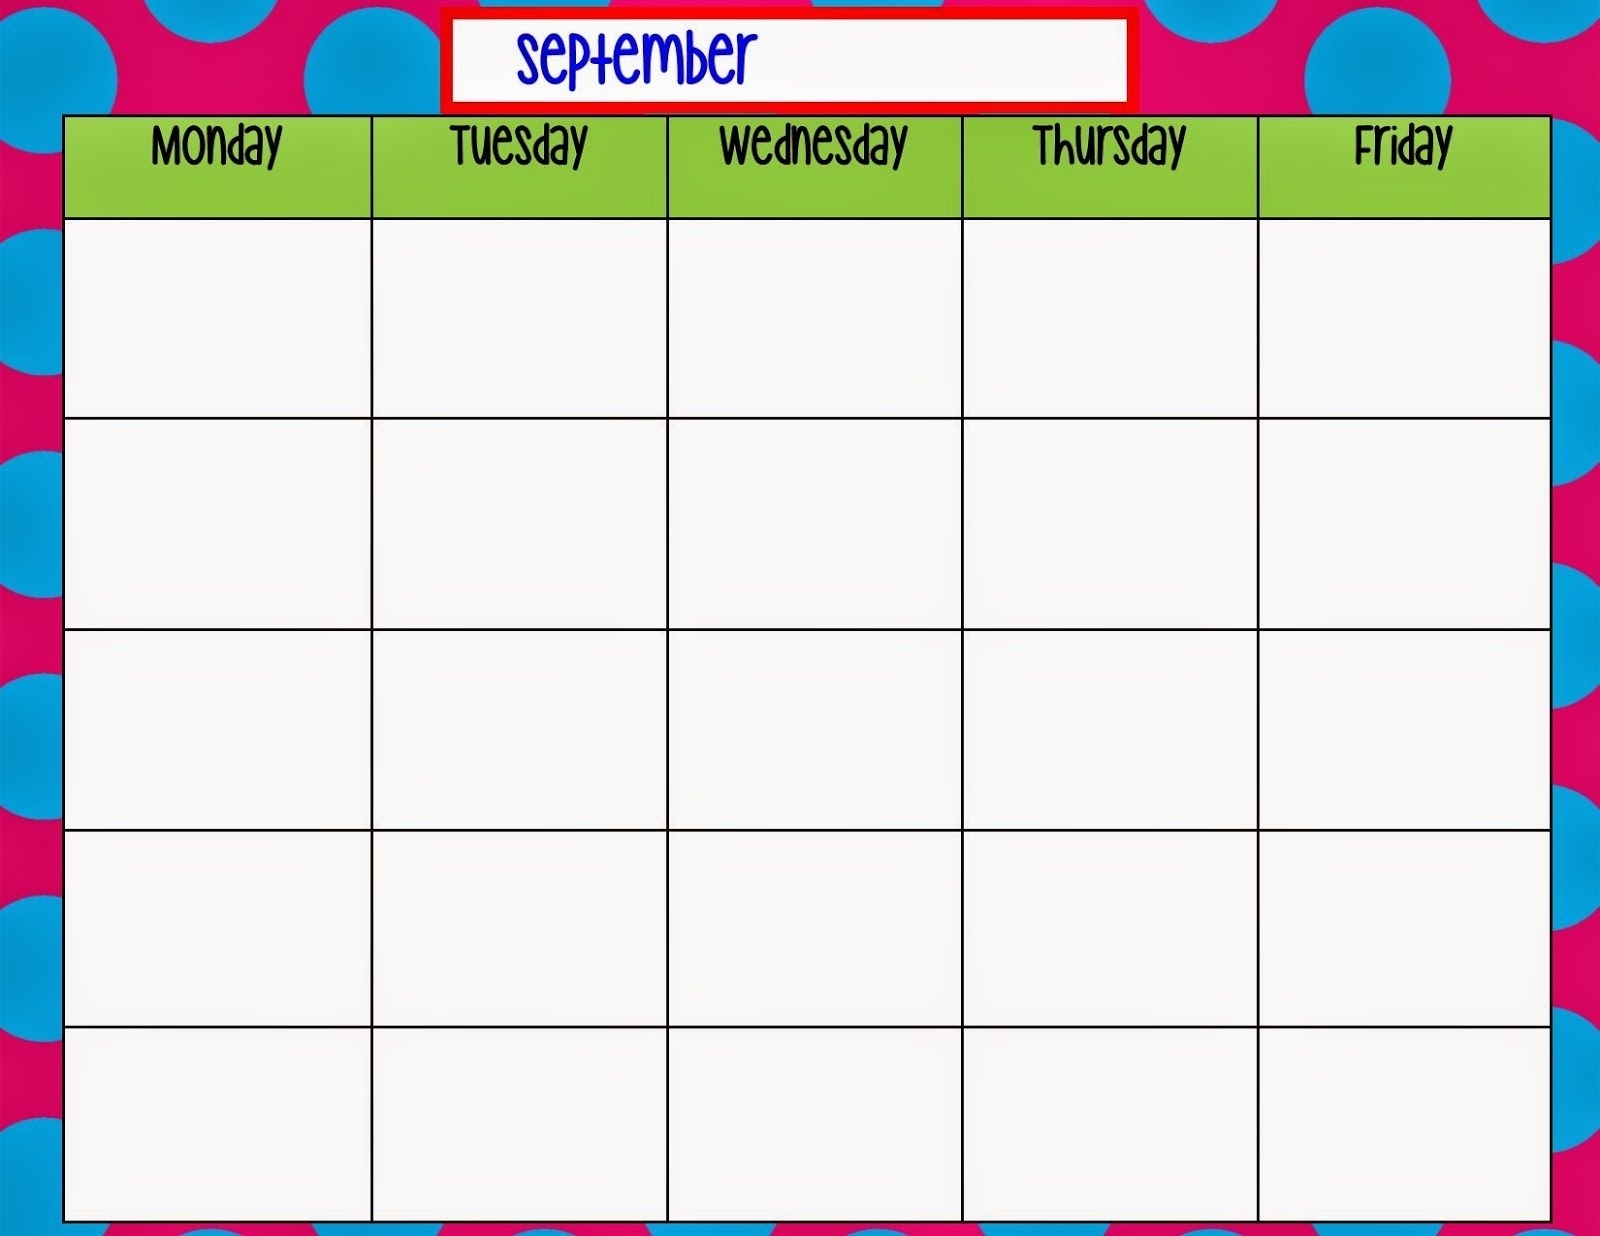 Schedule Template Monday Through Friday Weekly R Word Monthly | Smorad regarding Monthly Calendar Monday Through Friday